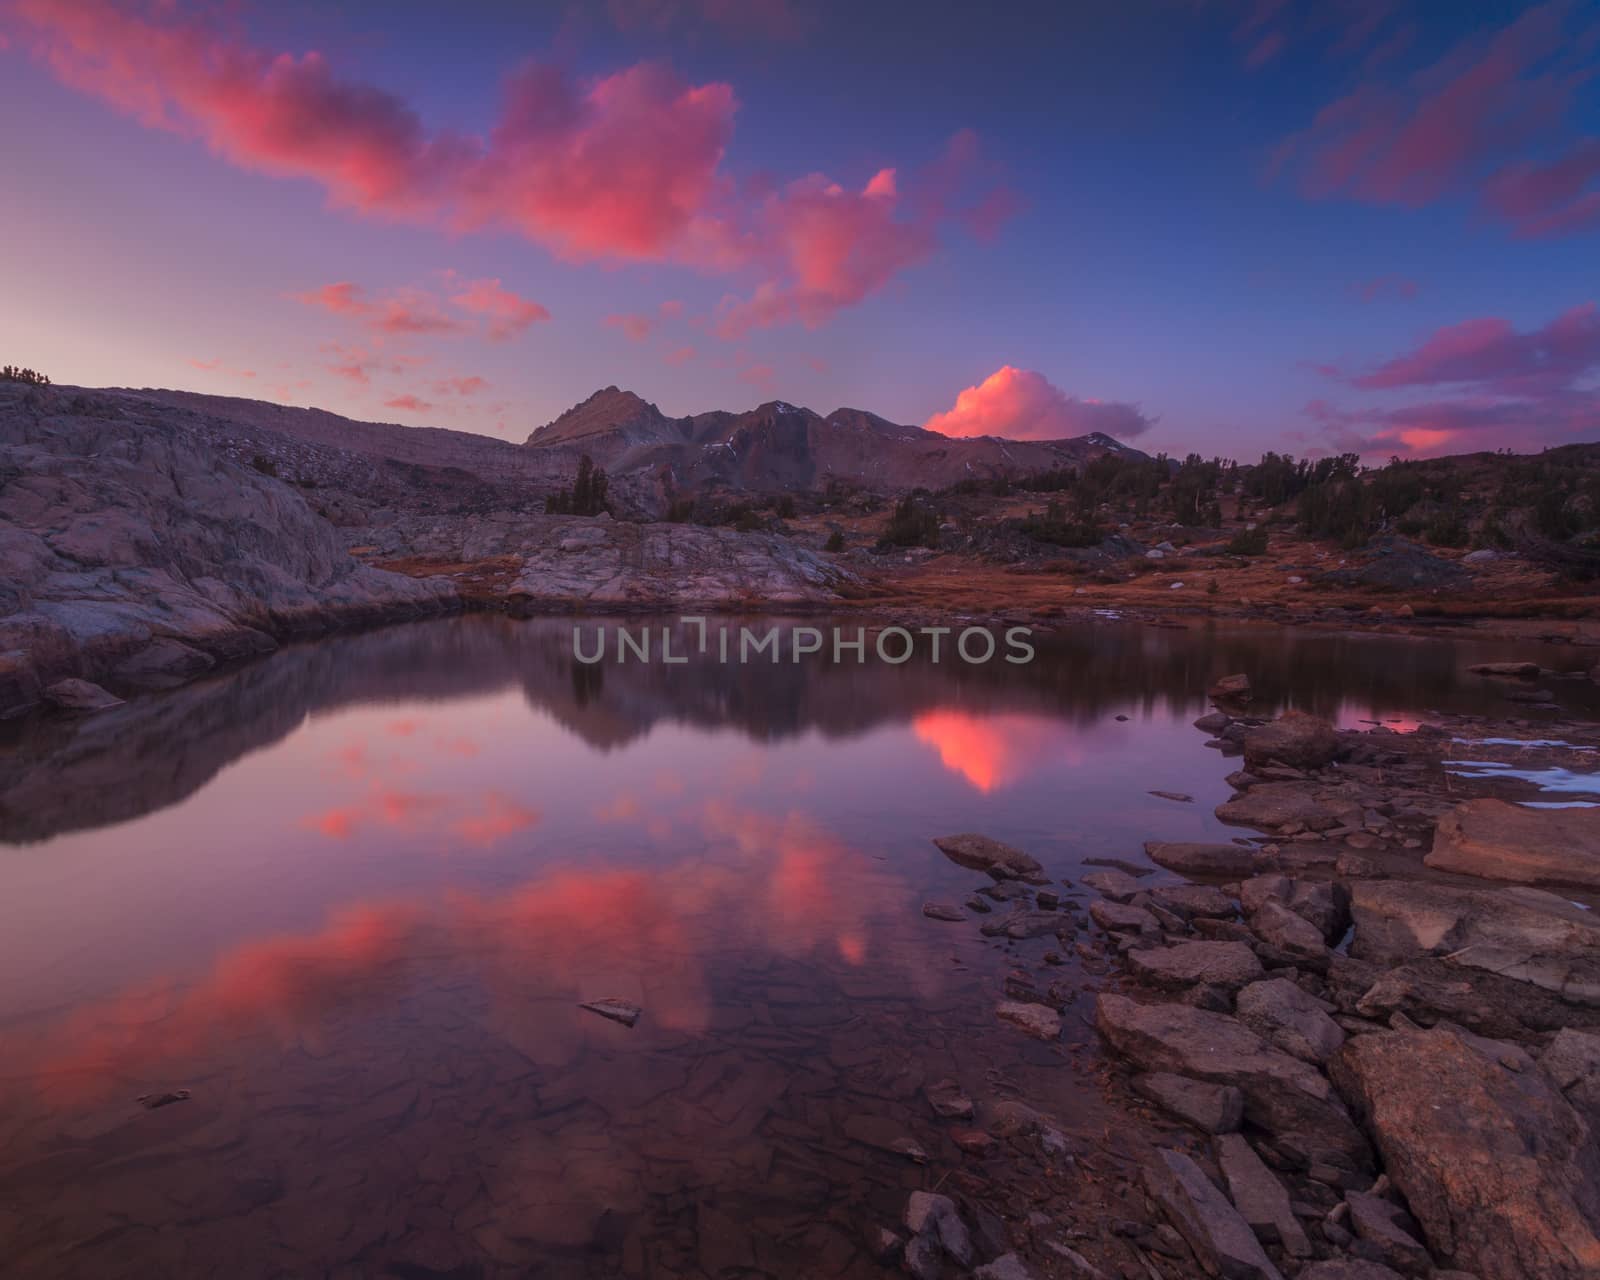 Alpenglow in Hoover wilderness by adonis_abril